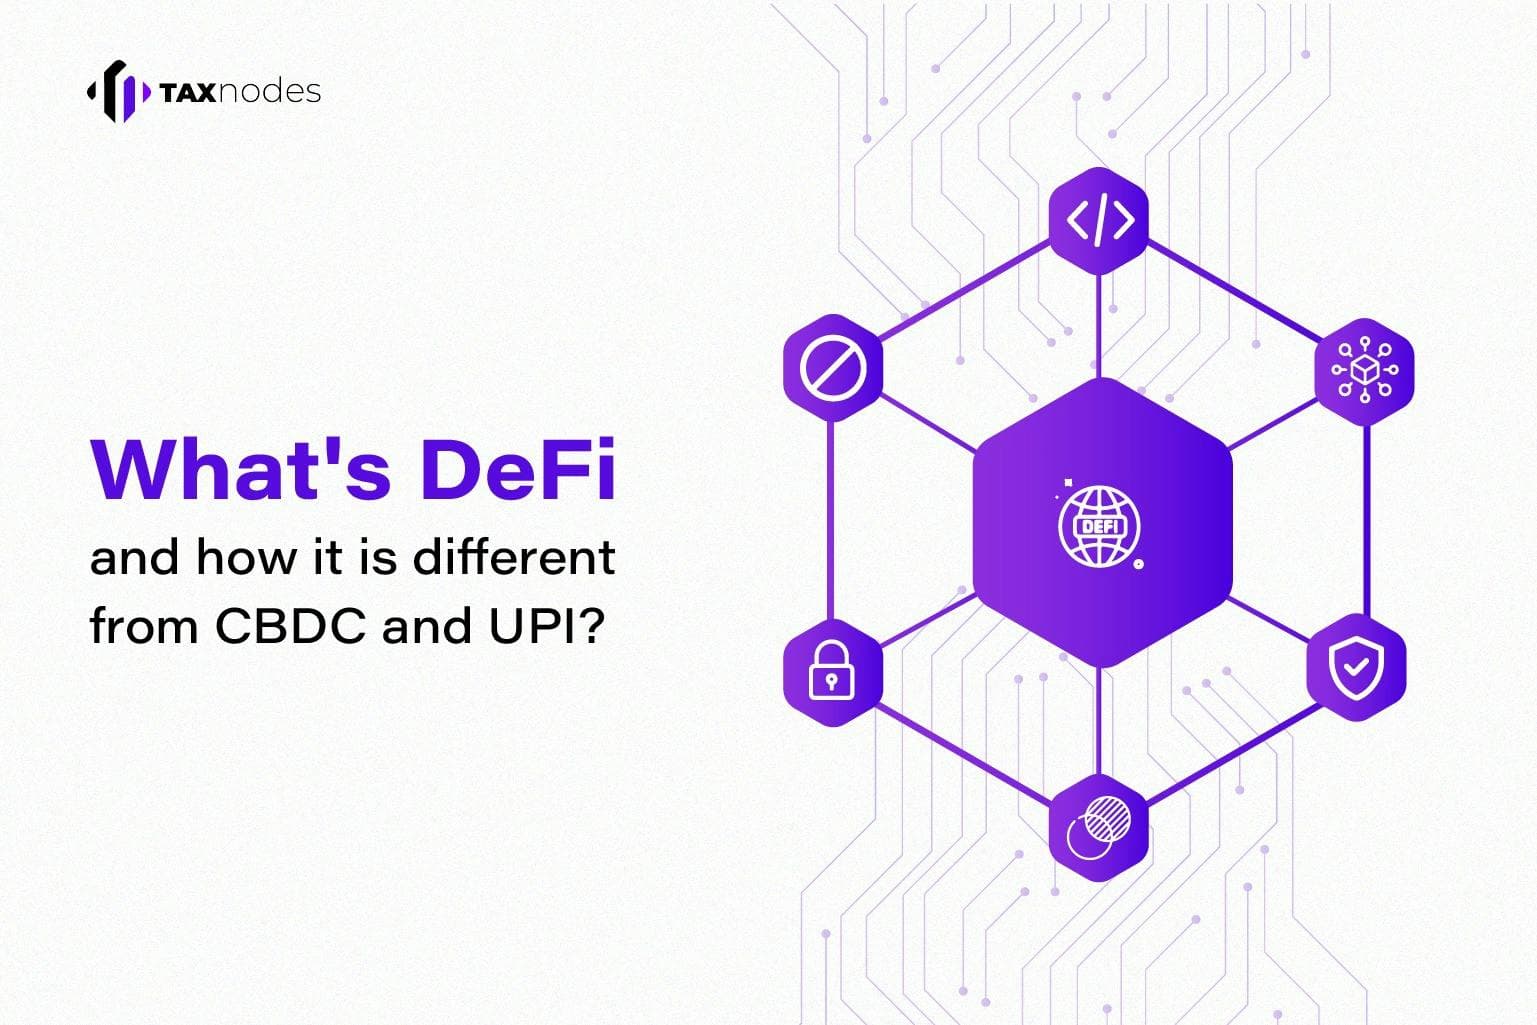 What is defi and how is it different from cbdc and upi